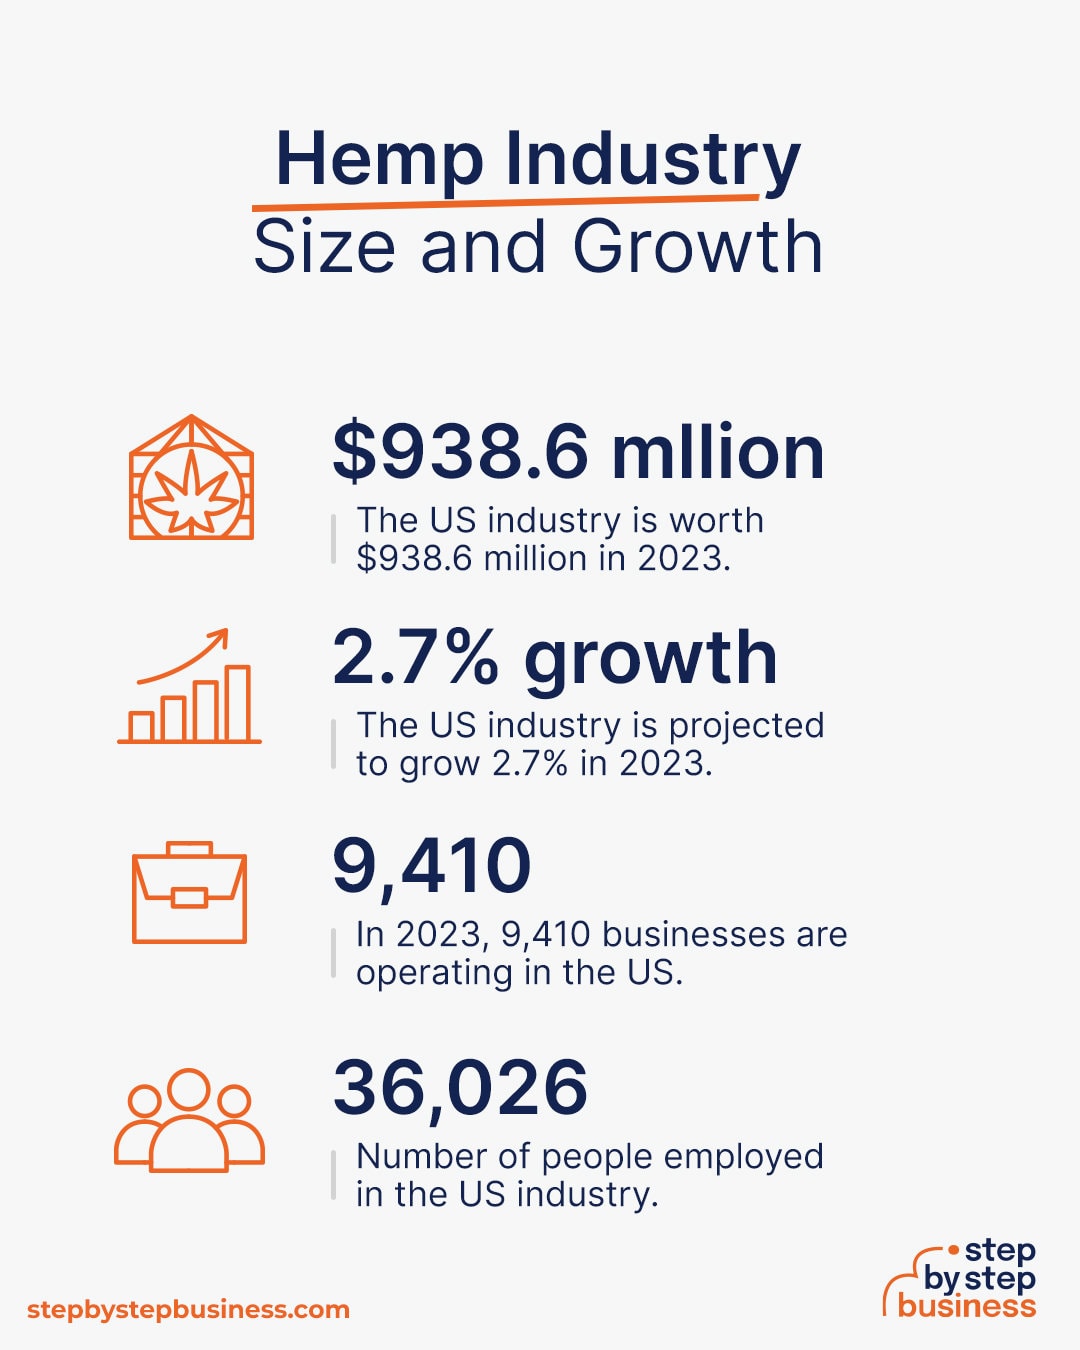 Hemp industry size and growth